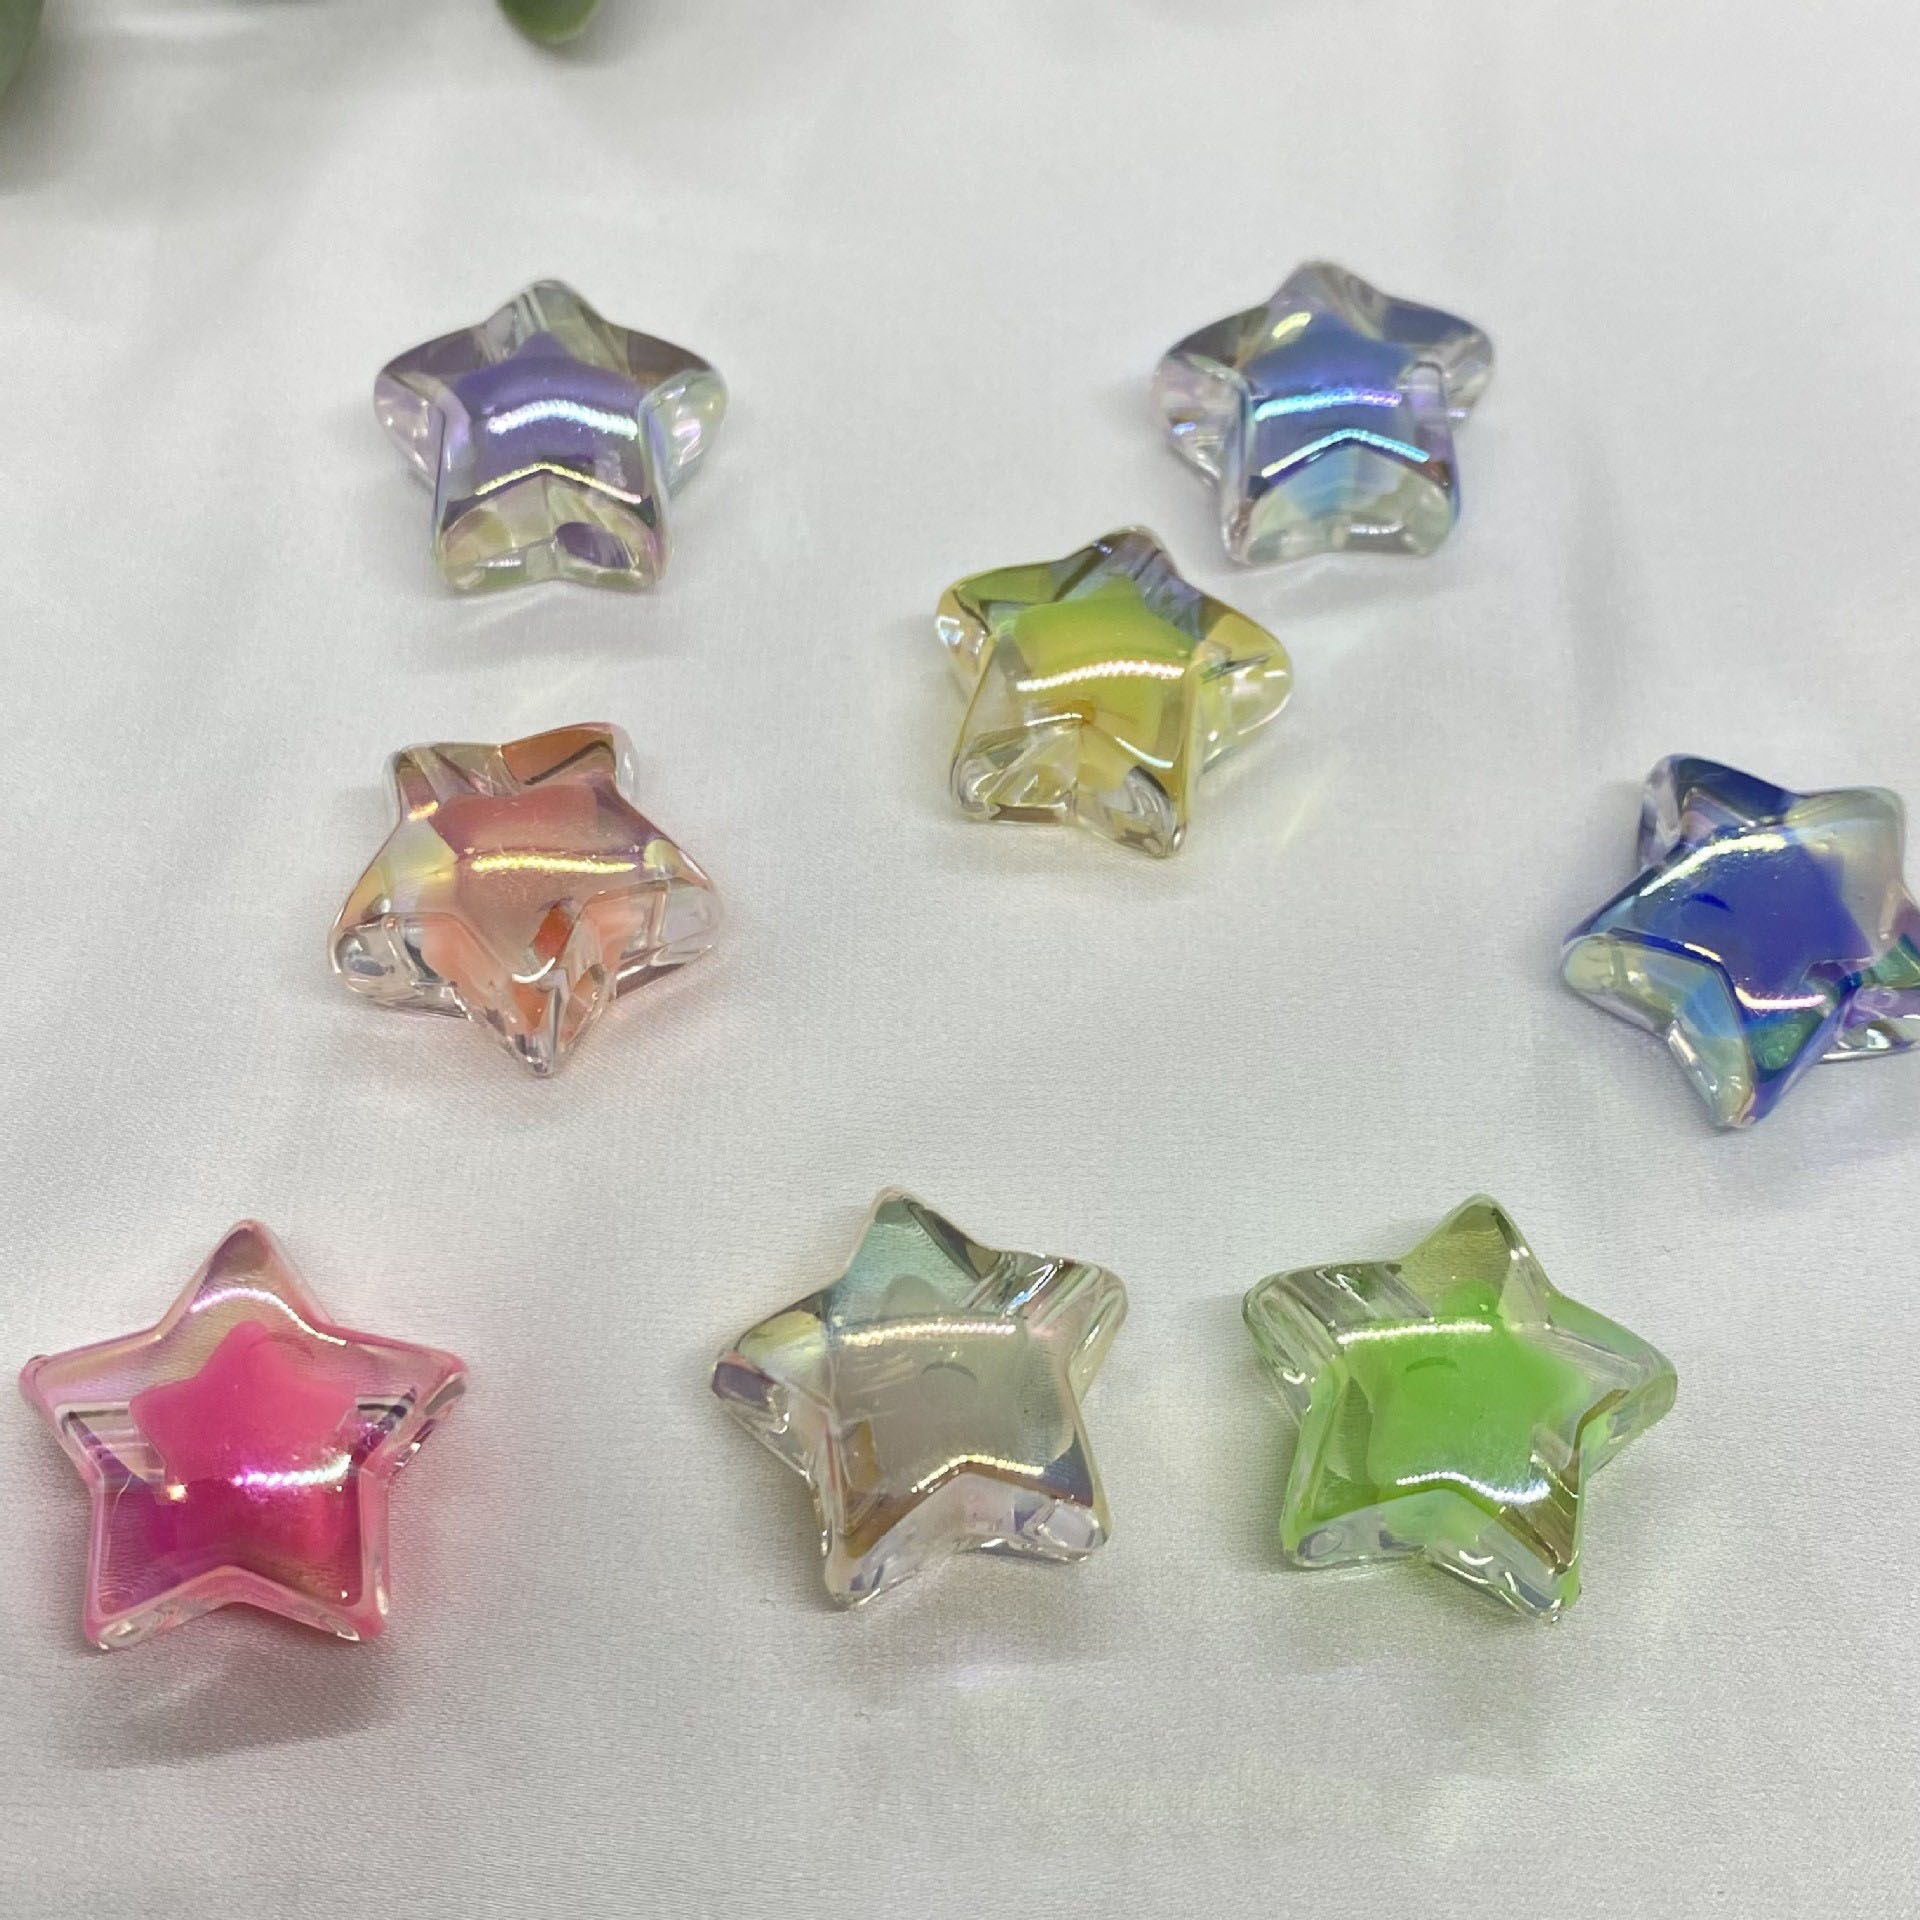 Five-pointed star mix 20mm